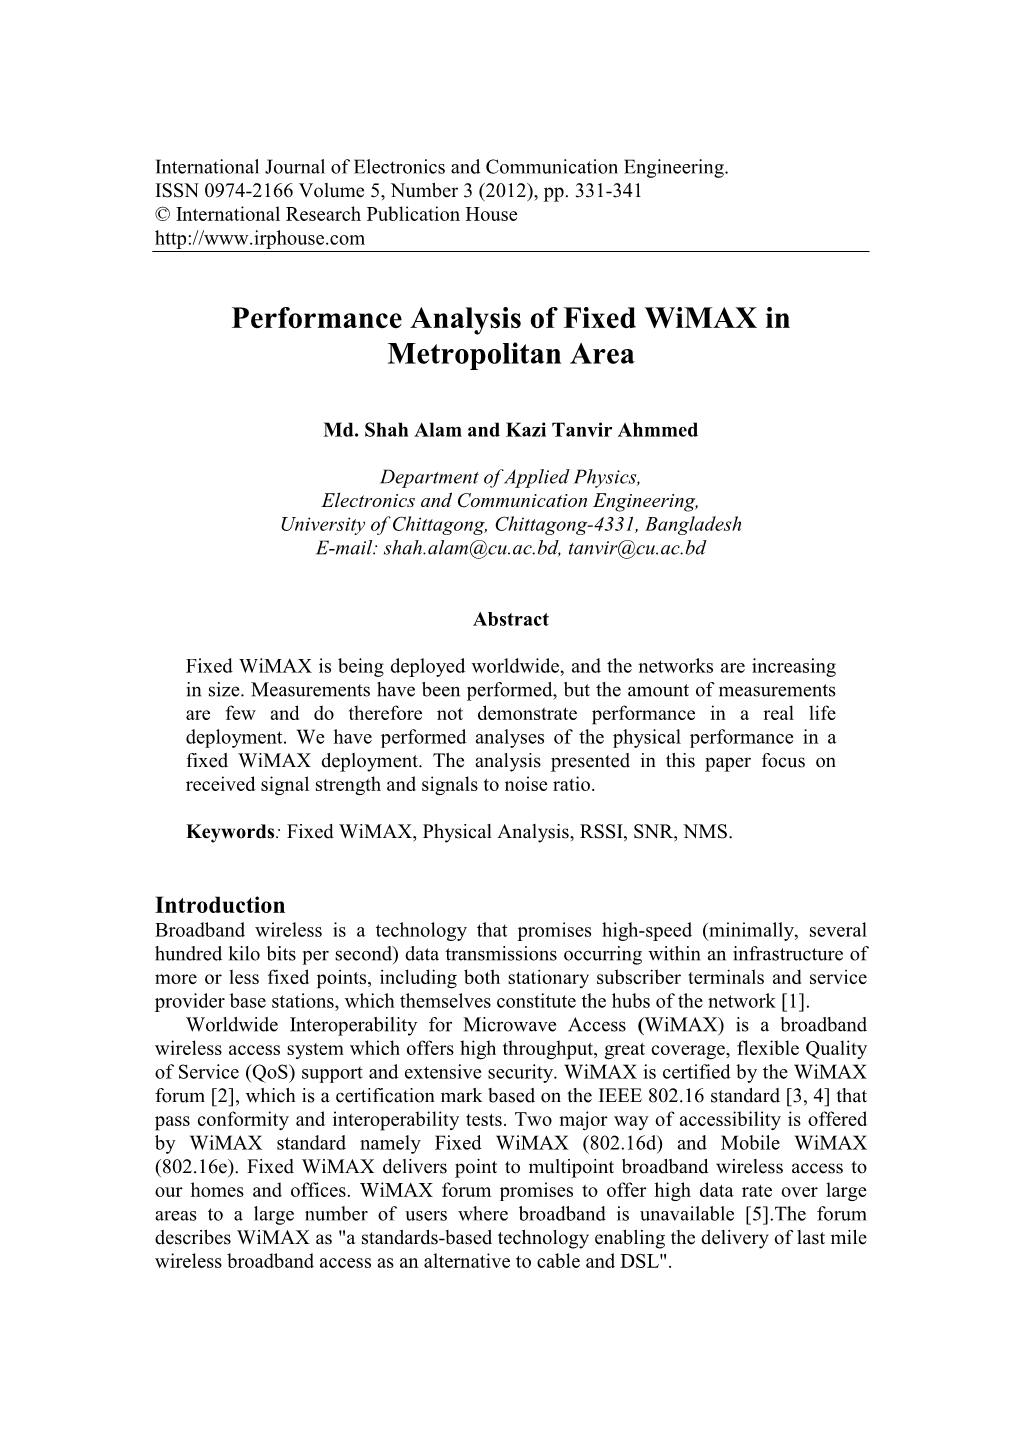 Performance Analysis of Fixed Wimax in Metropolitan Area